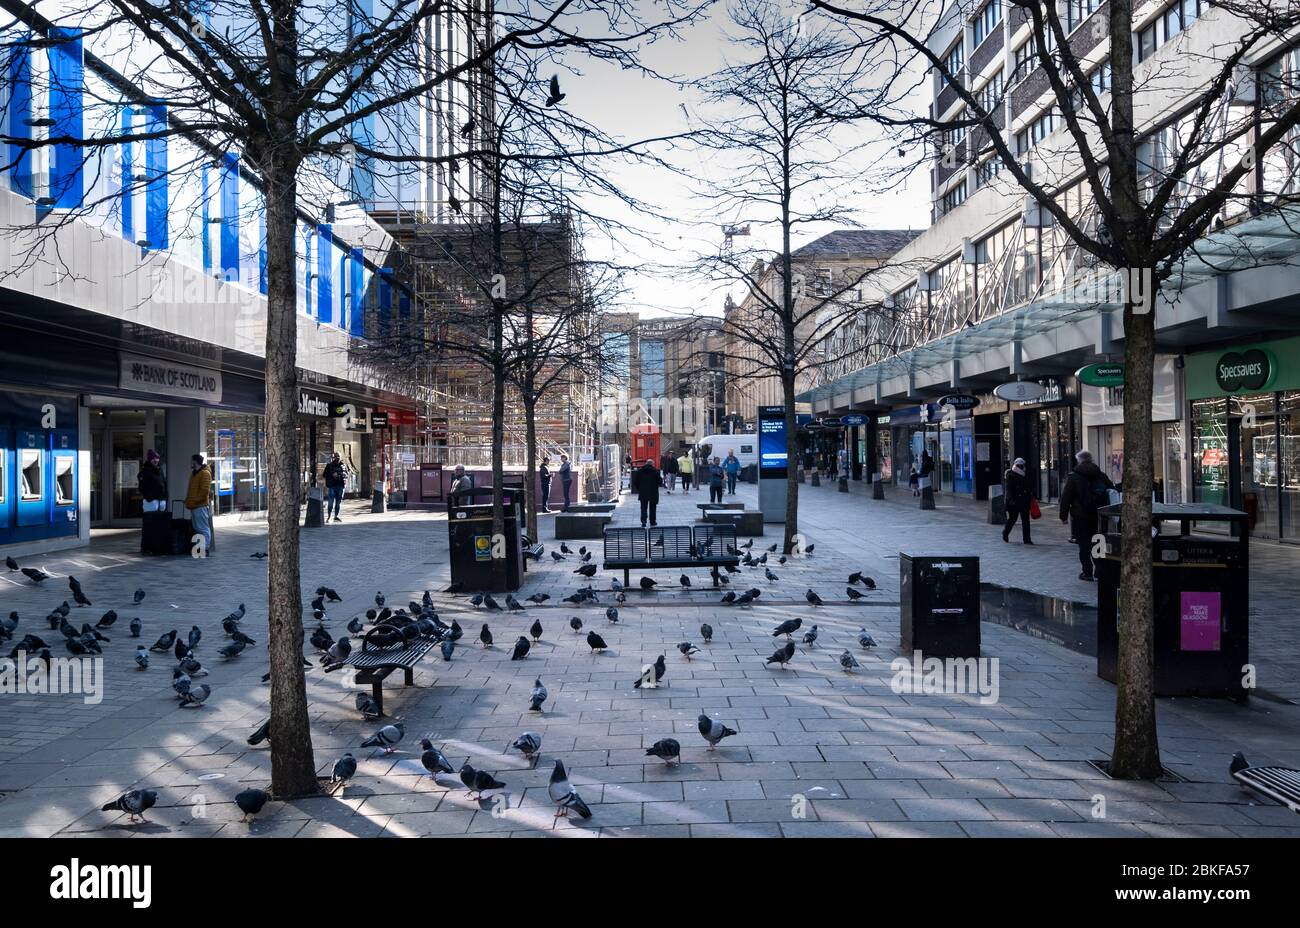 Sauchiehall street in Glasgow during the Covid-19 lockdown. Stock Photo